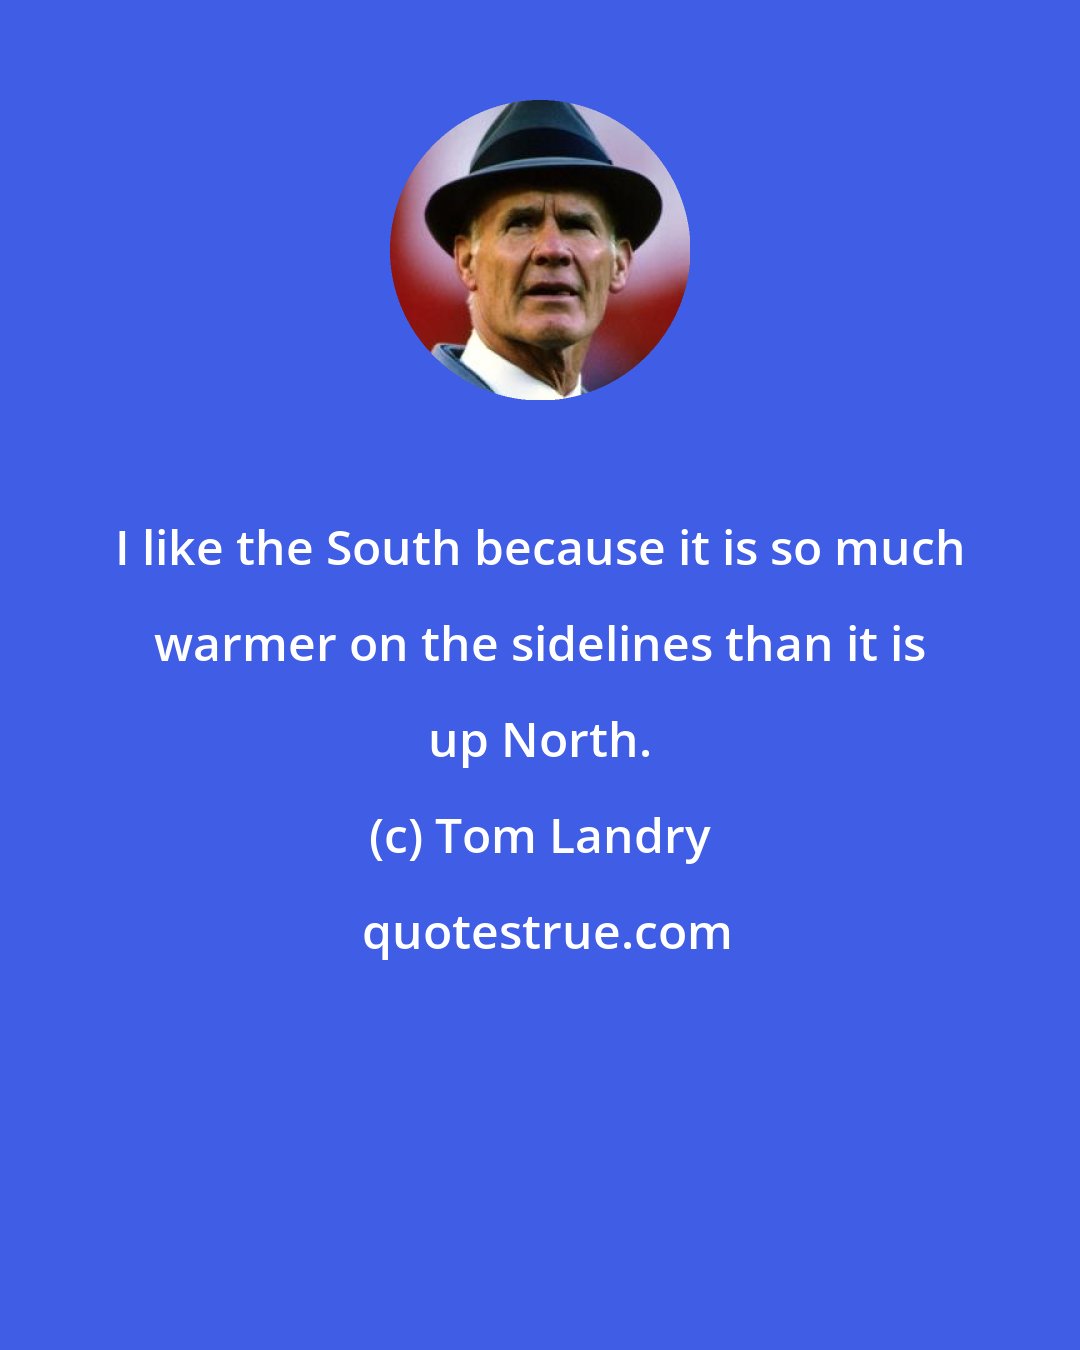 Tom Landry: I like the South because it is so much warmer on the sidelines than it is up North.